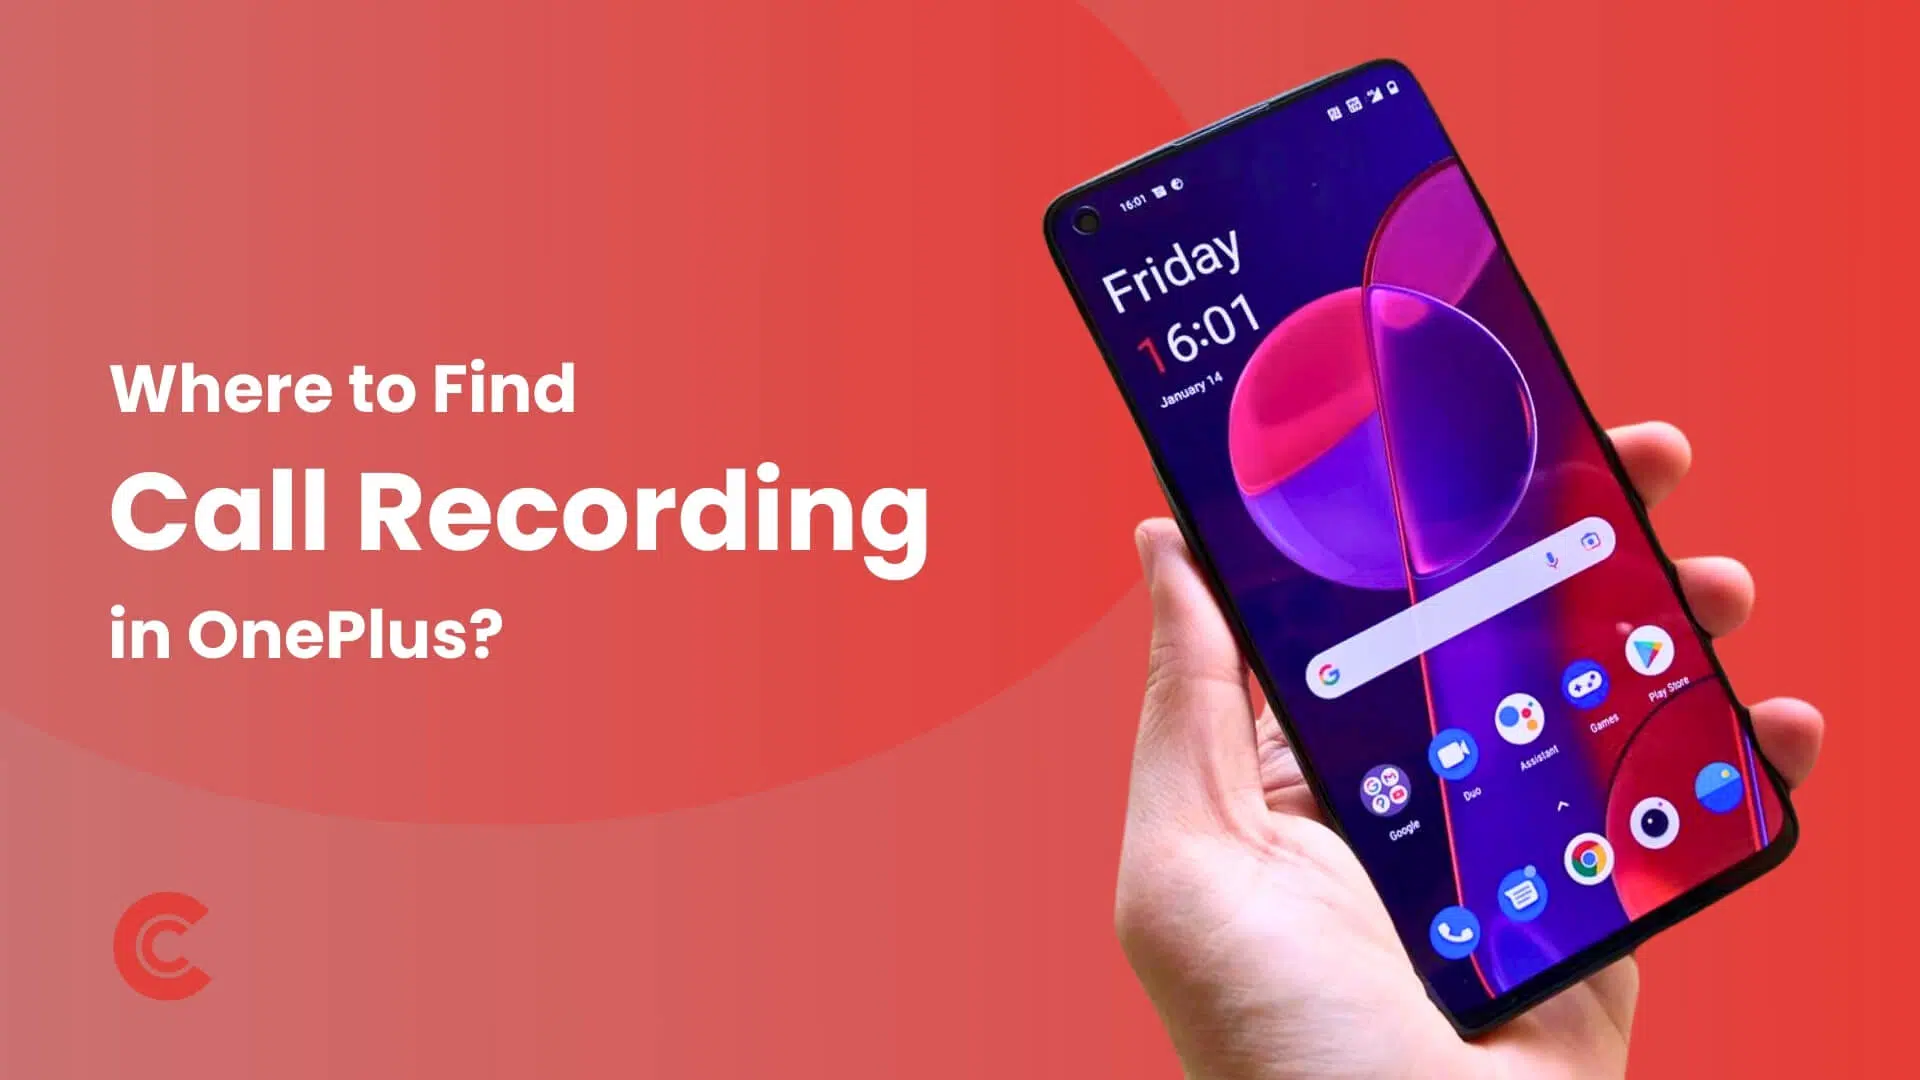 Where to Find Call Recording in OnePlus